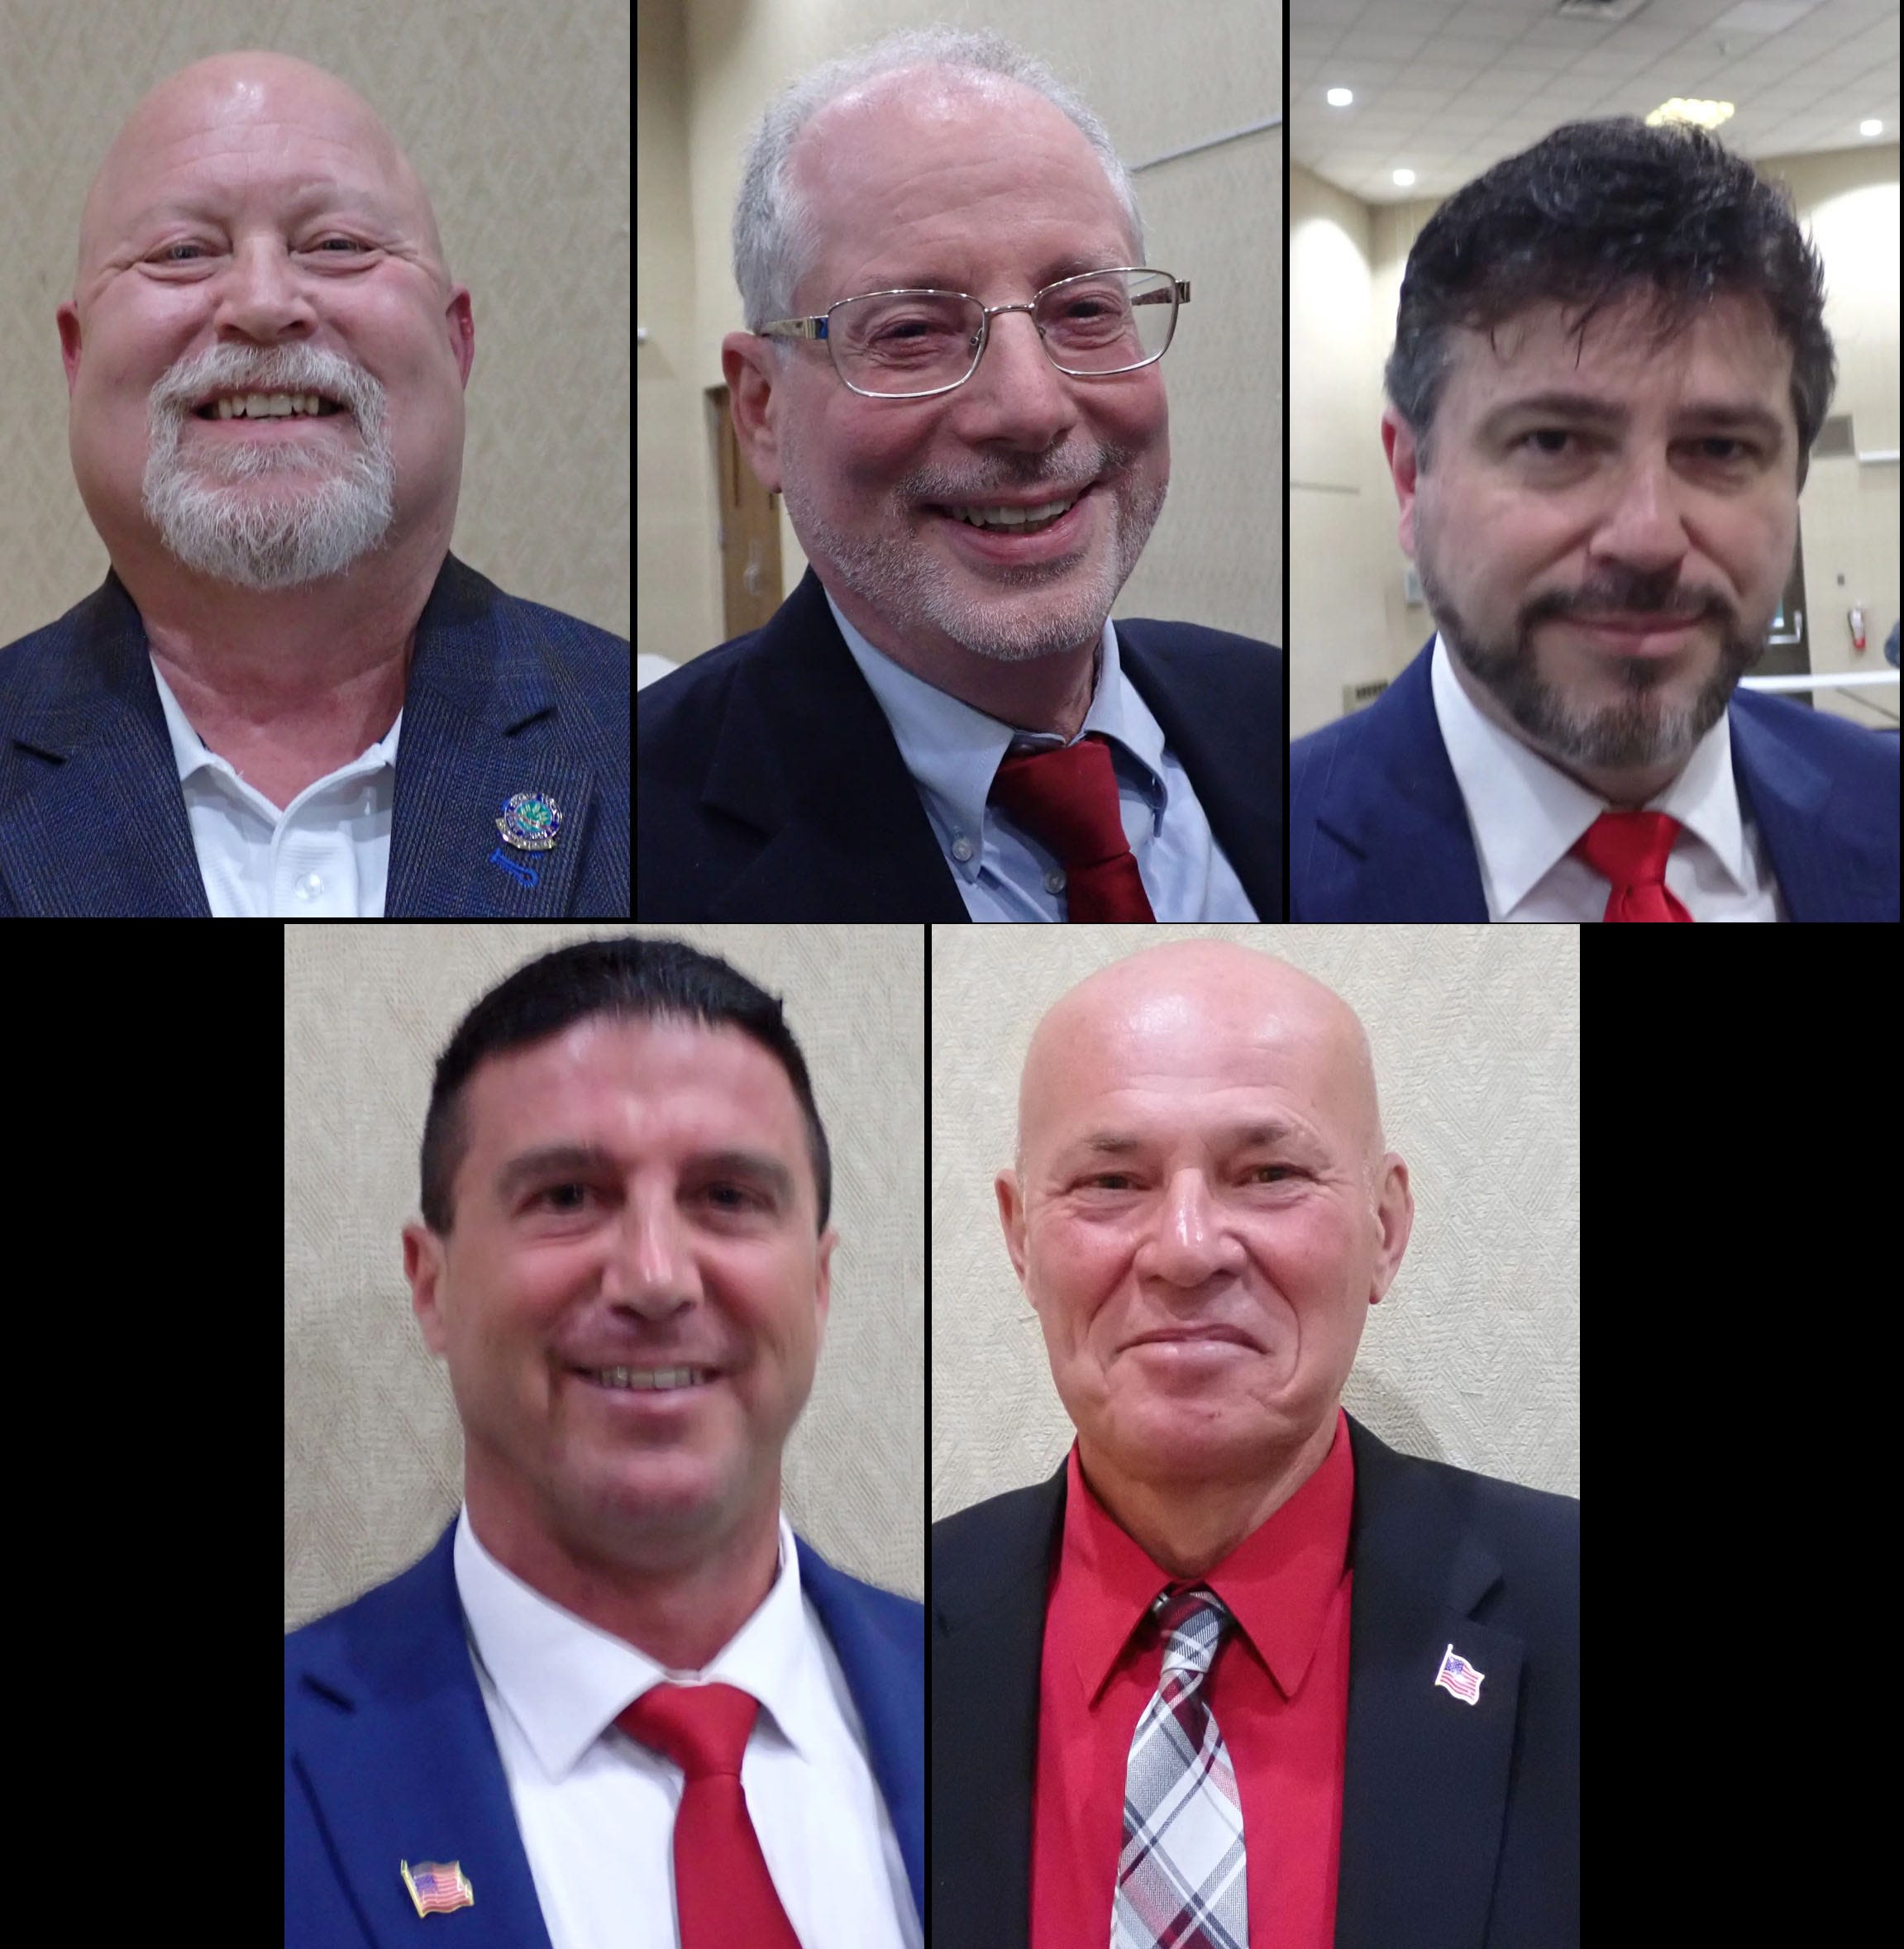 Sussex County primary results: Commissioner celebrates win over 'toxic' GOP opponents